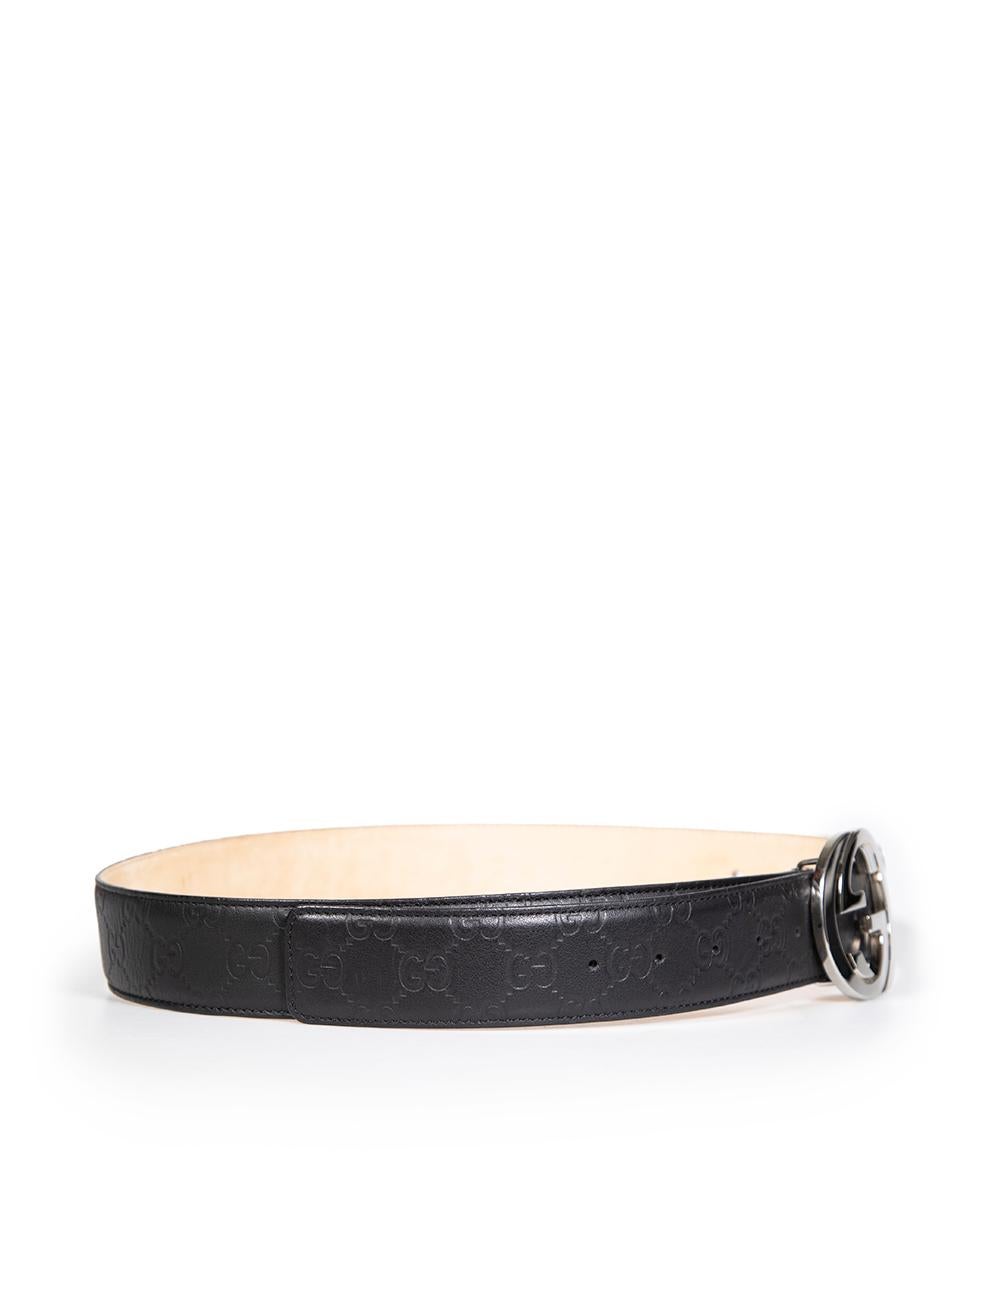 CONDITION is Very good. Hardly any visible wear to belt is evident on this used Gucci designer resale item.
 
 Details
 Black
 Leather
 Belt
 GG Logo embossed pattern
 Silver GG buckle
 
 
 Made in Italy
 
 Composition
 EXTERIOR: Leather
 INTERIOR: